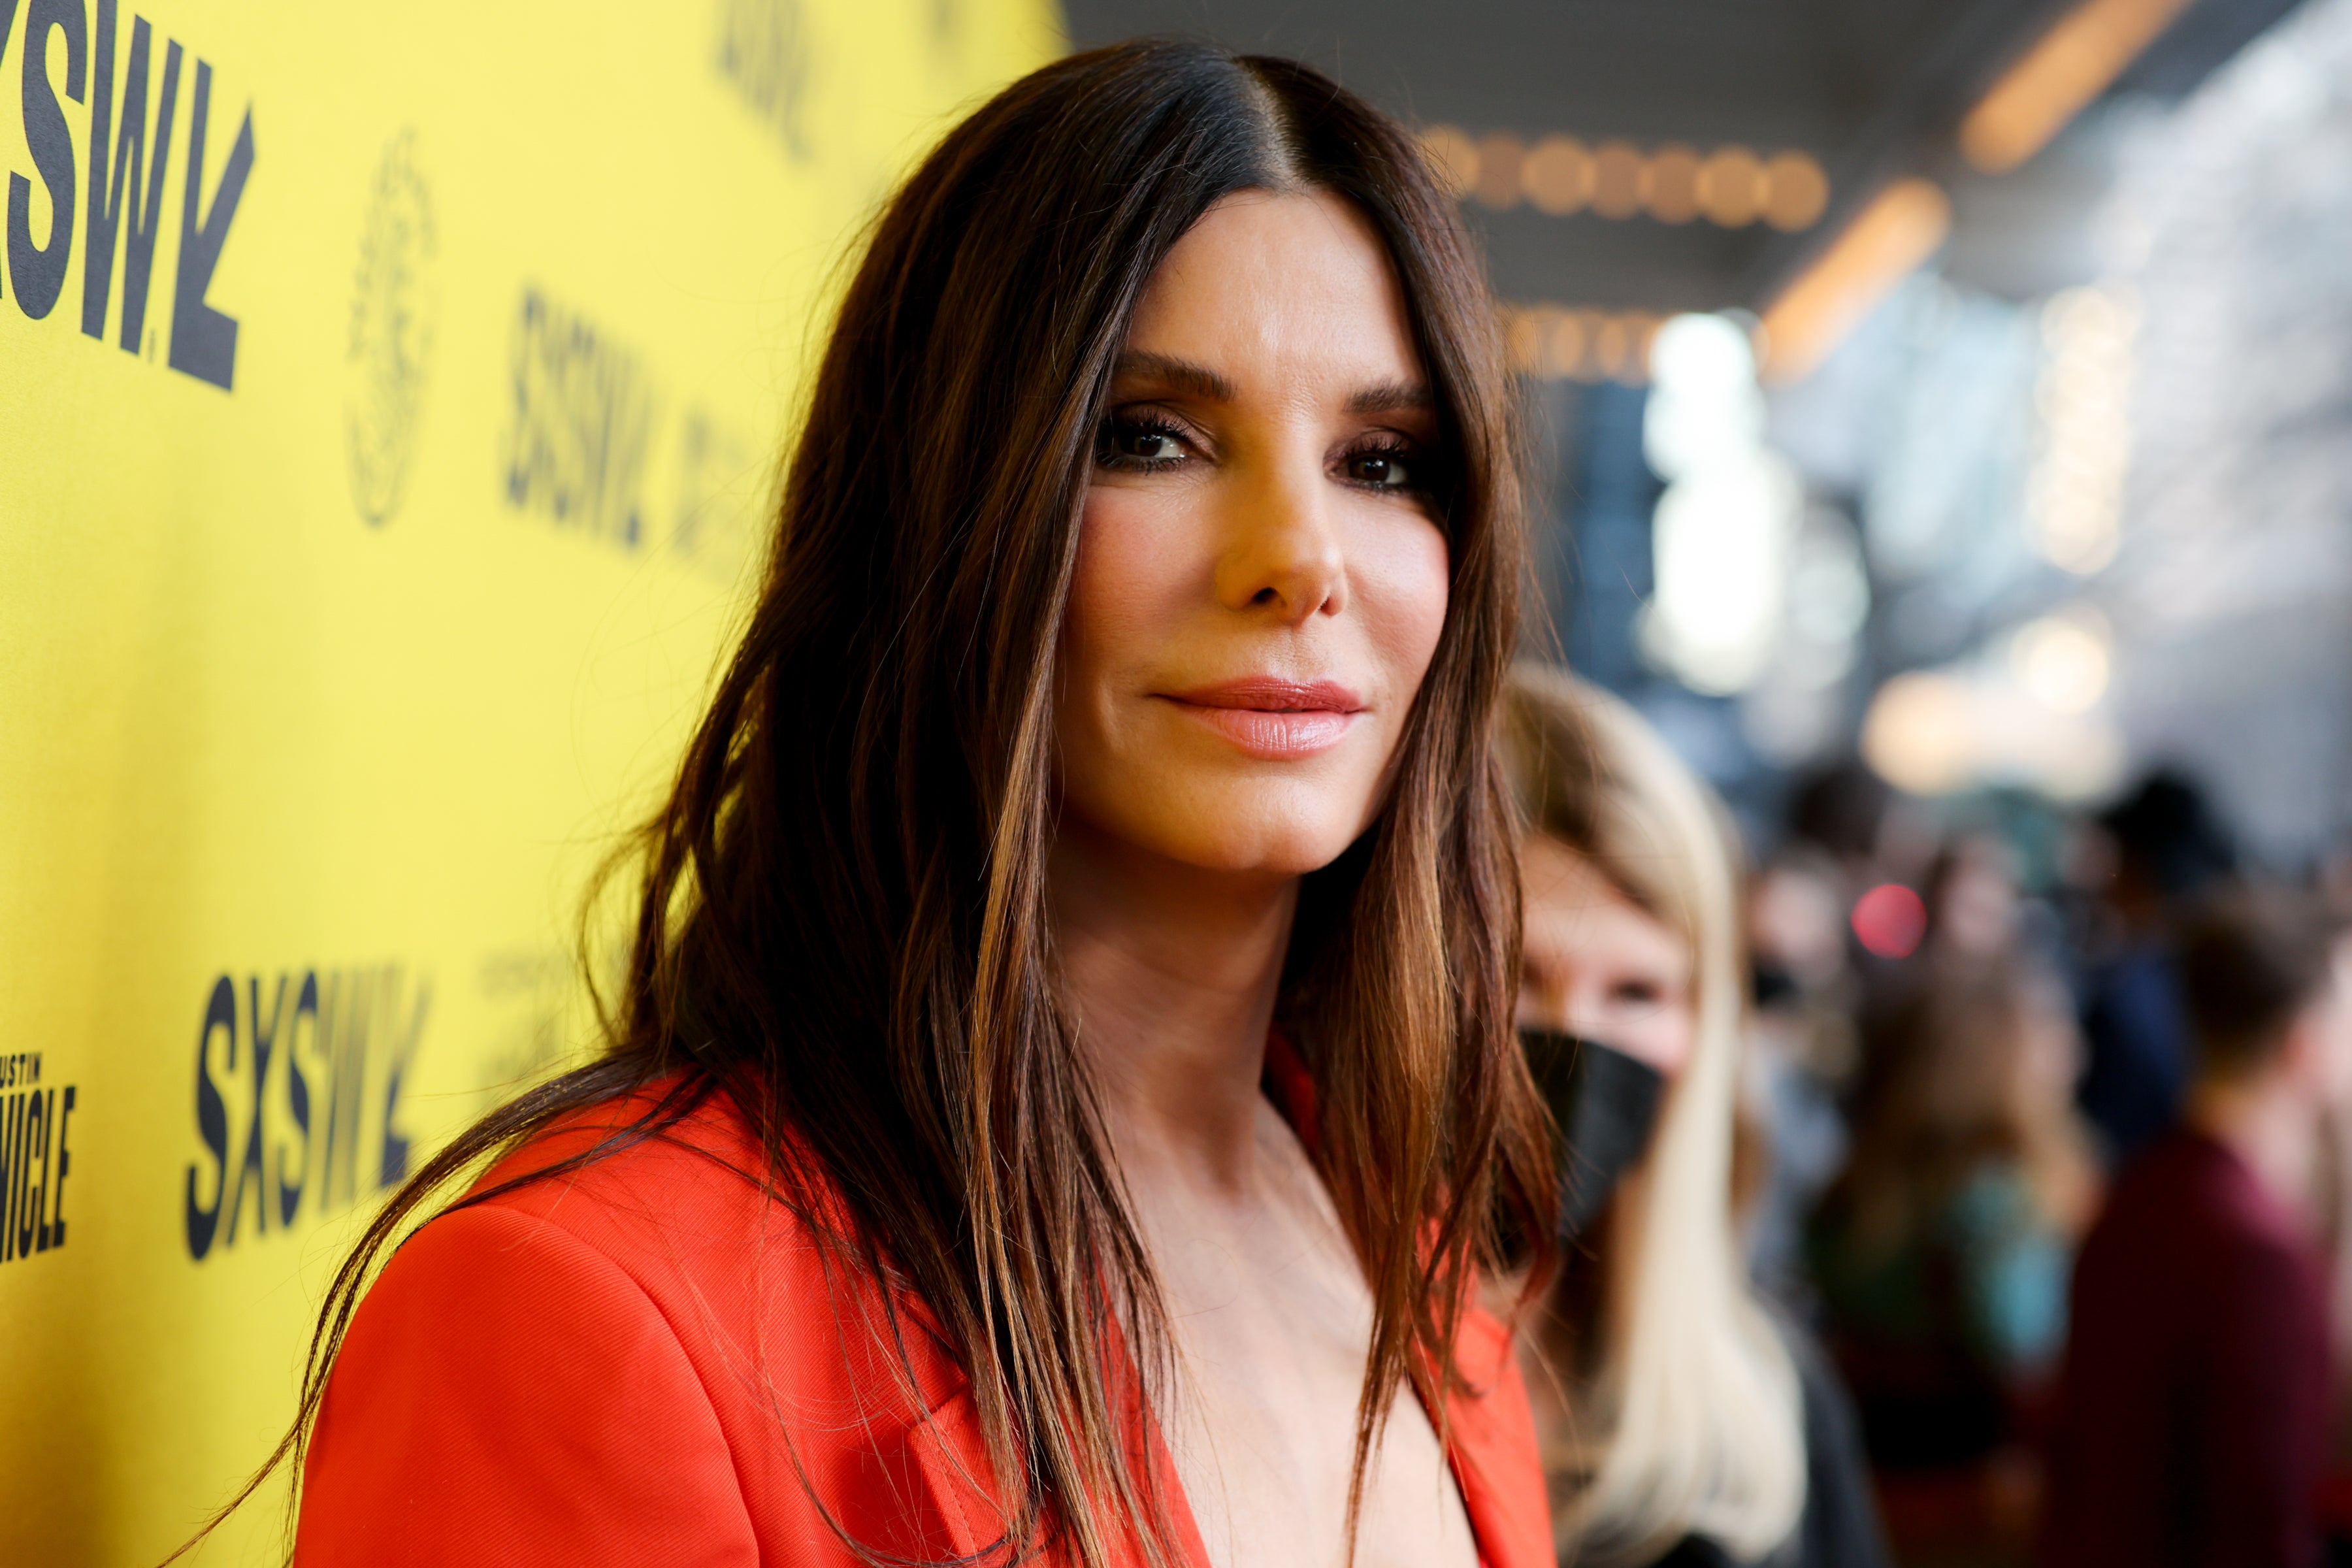 Sandra Bullock attends the premiere of ‘The Lost City' during the 2022 SXSW Conference and Festivals